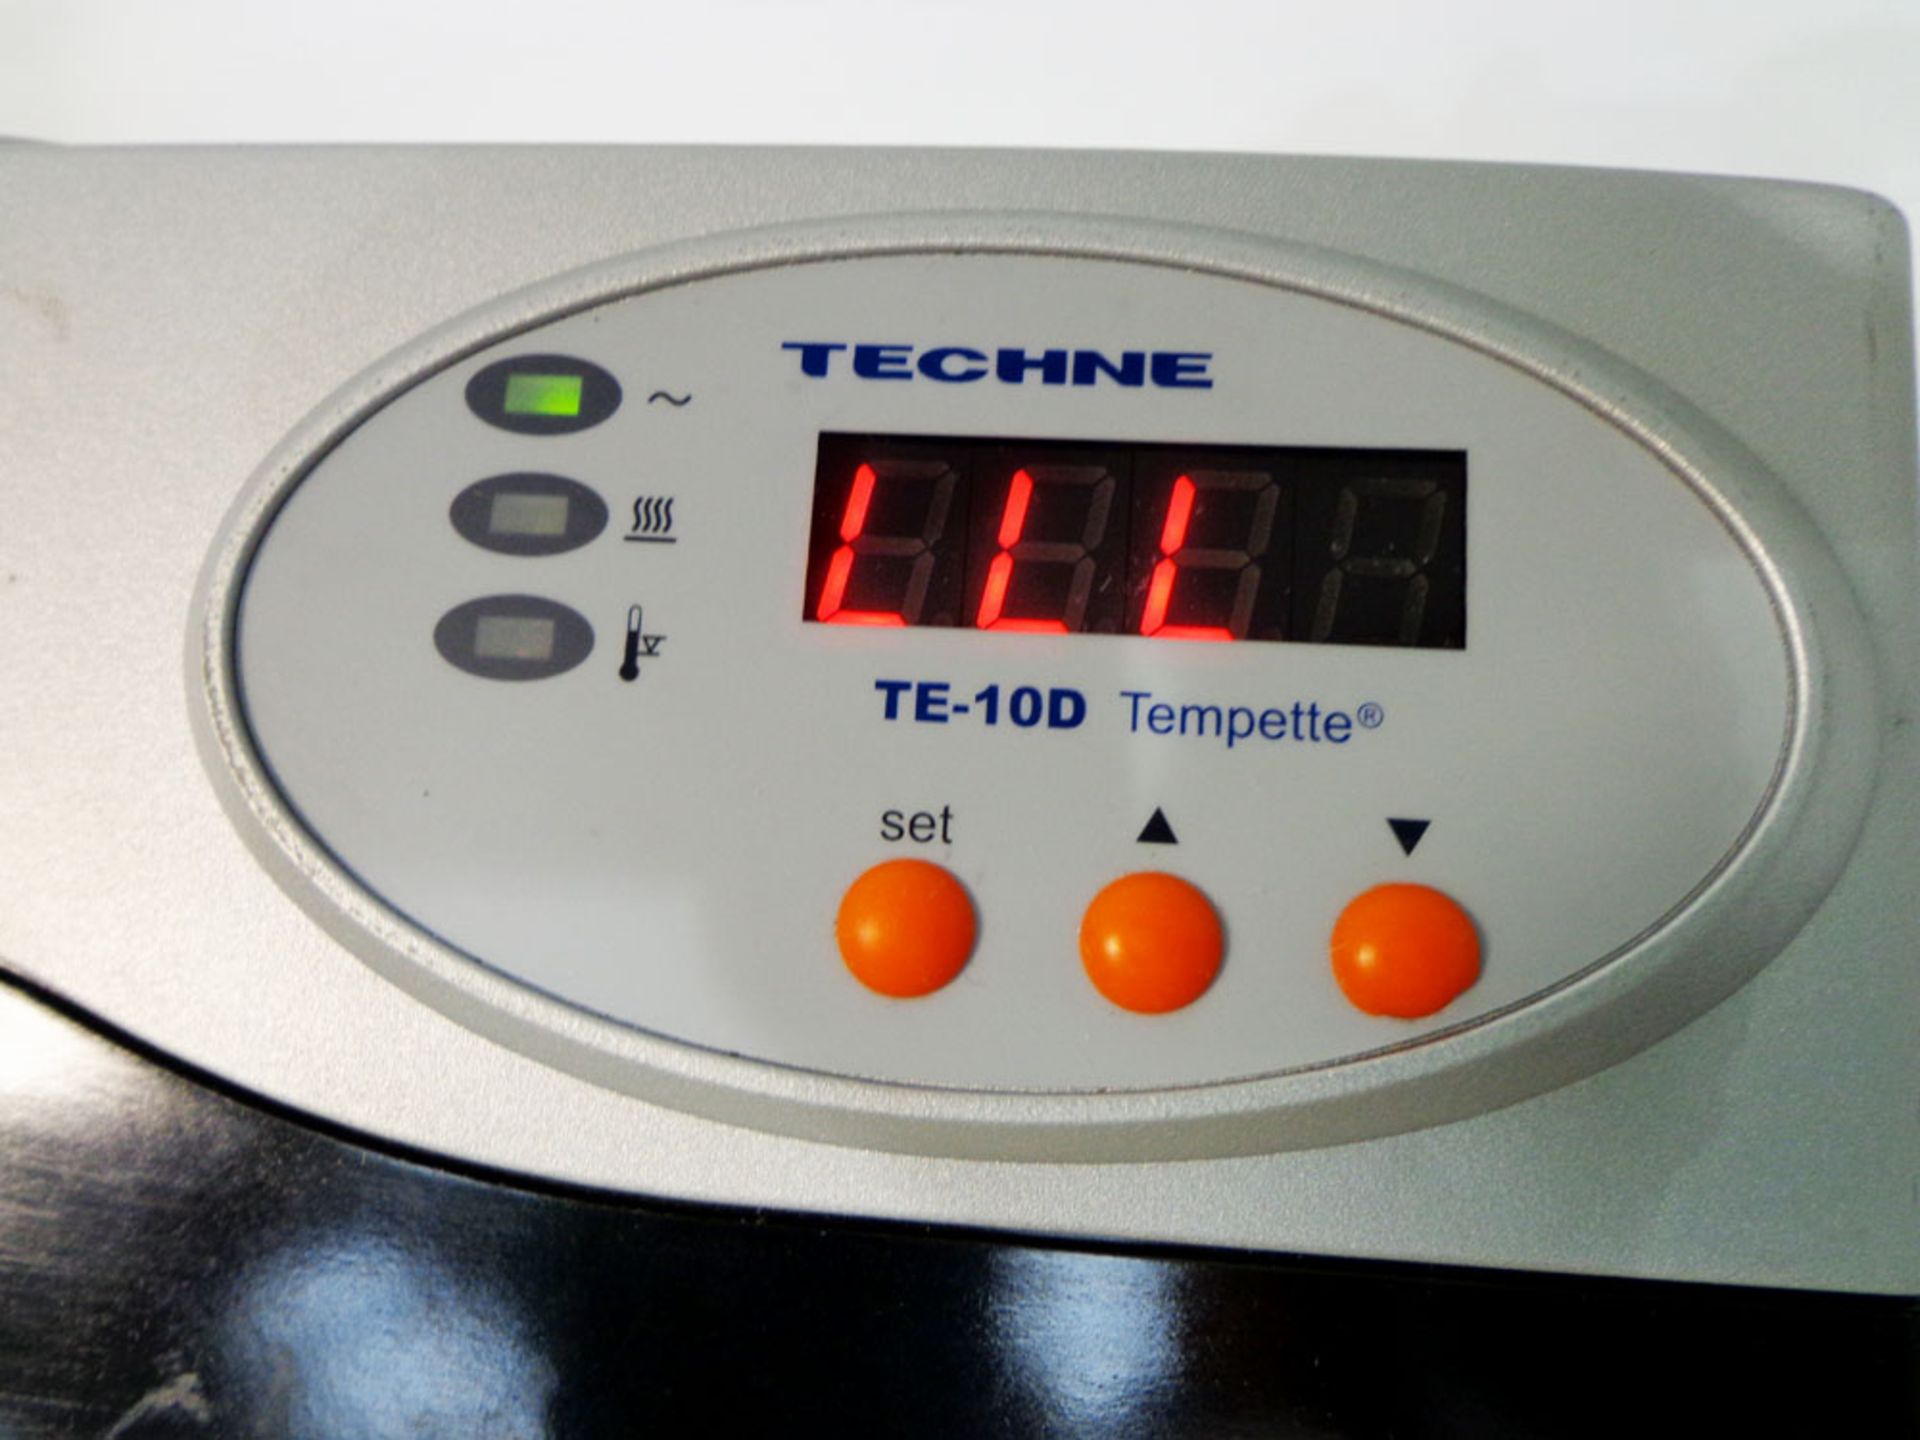 Techne Thermoregulator TE-10 Tempette FTE10DDC, S/N 169999-15 - Image 2 of 5